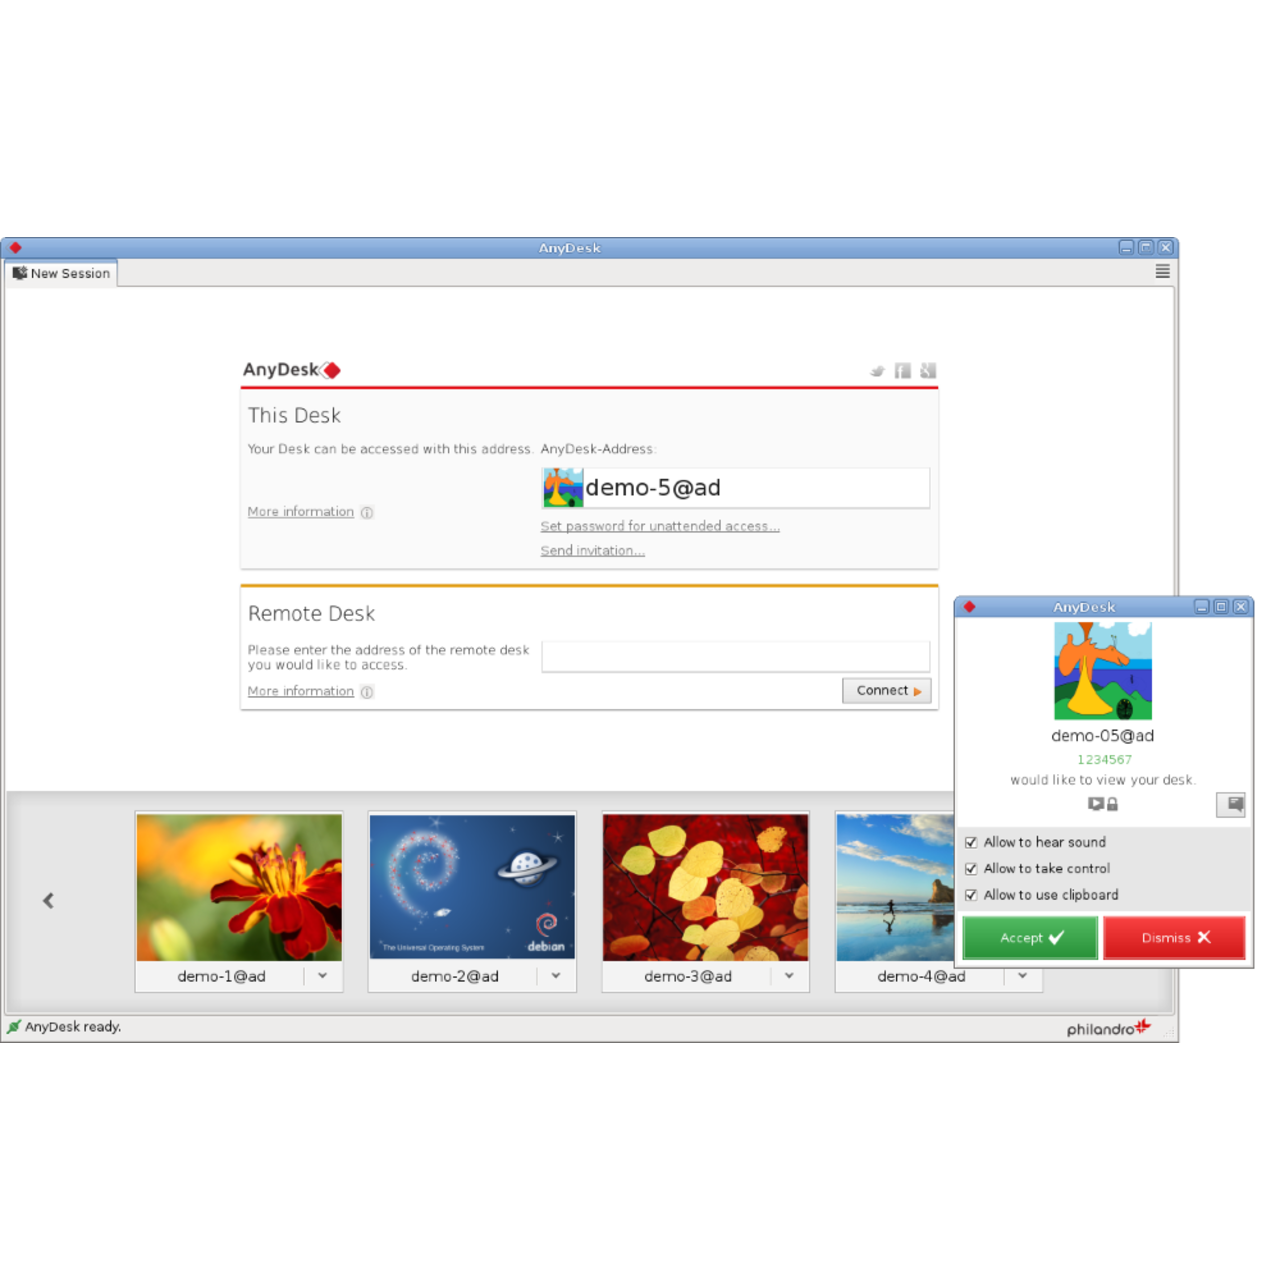 anydesk software download for pc